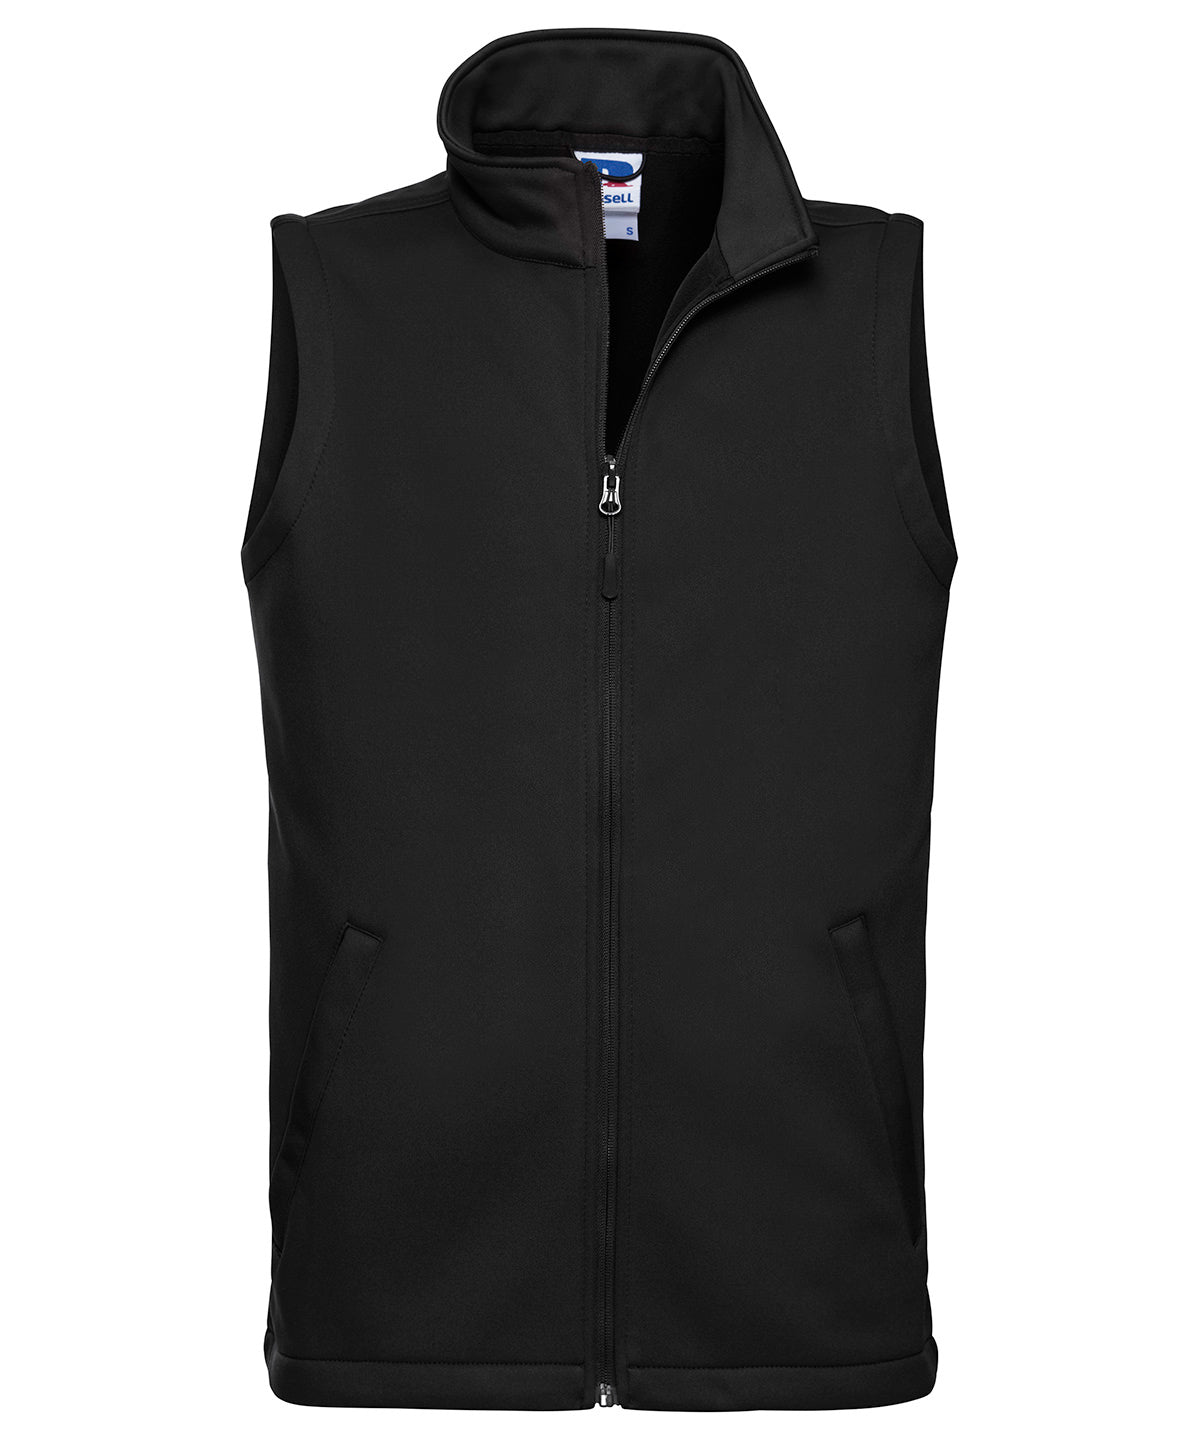 Russell Smart Softshell Gilet